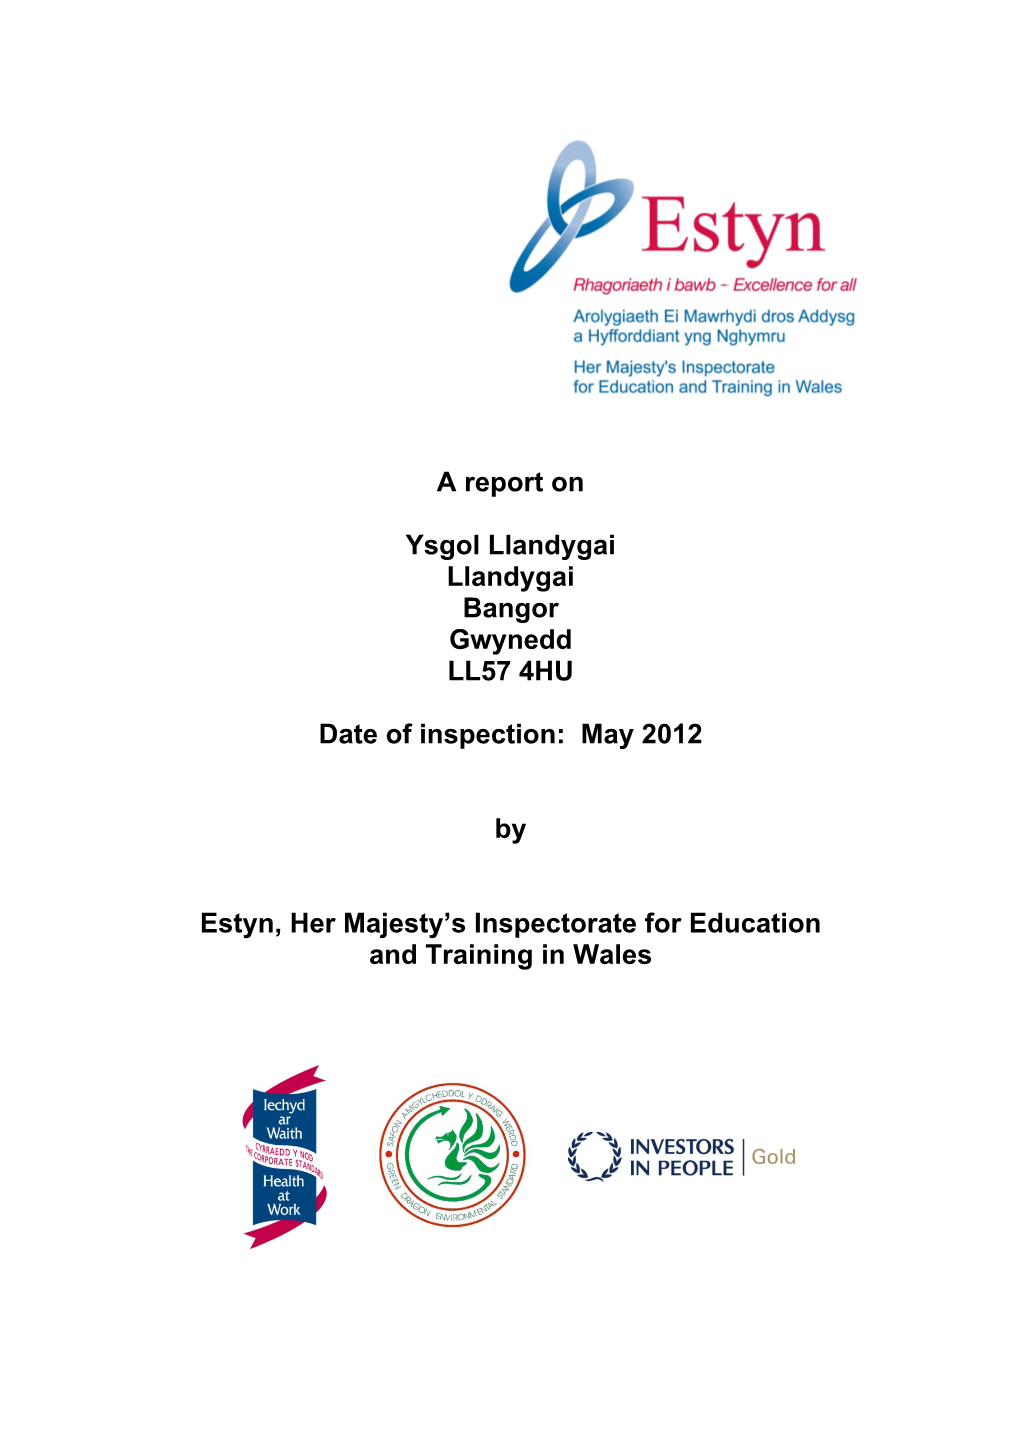 May 2012 by Estyn, Her Majesty's Inspecto